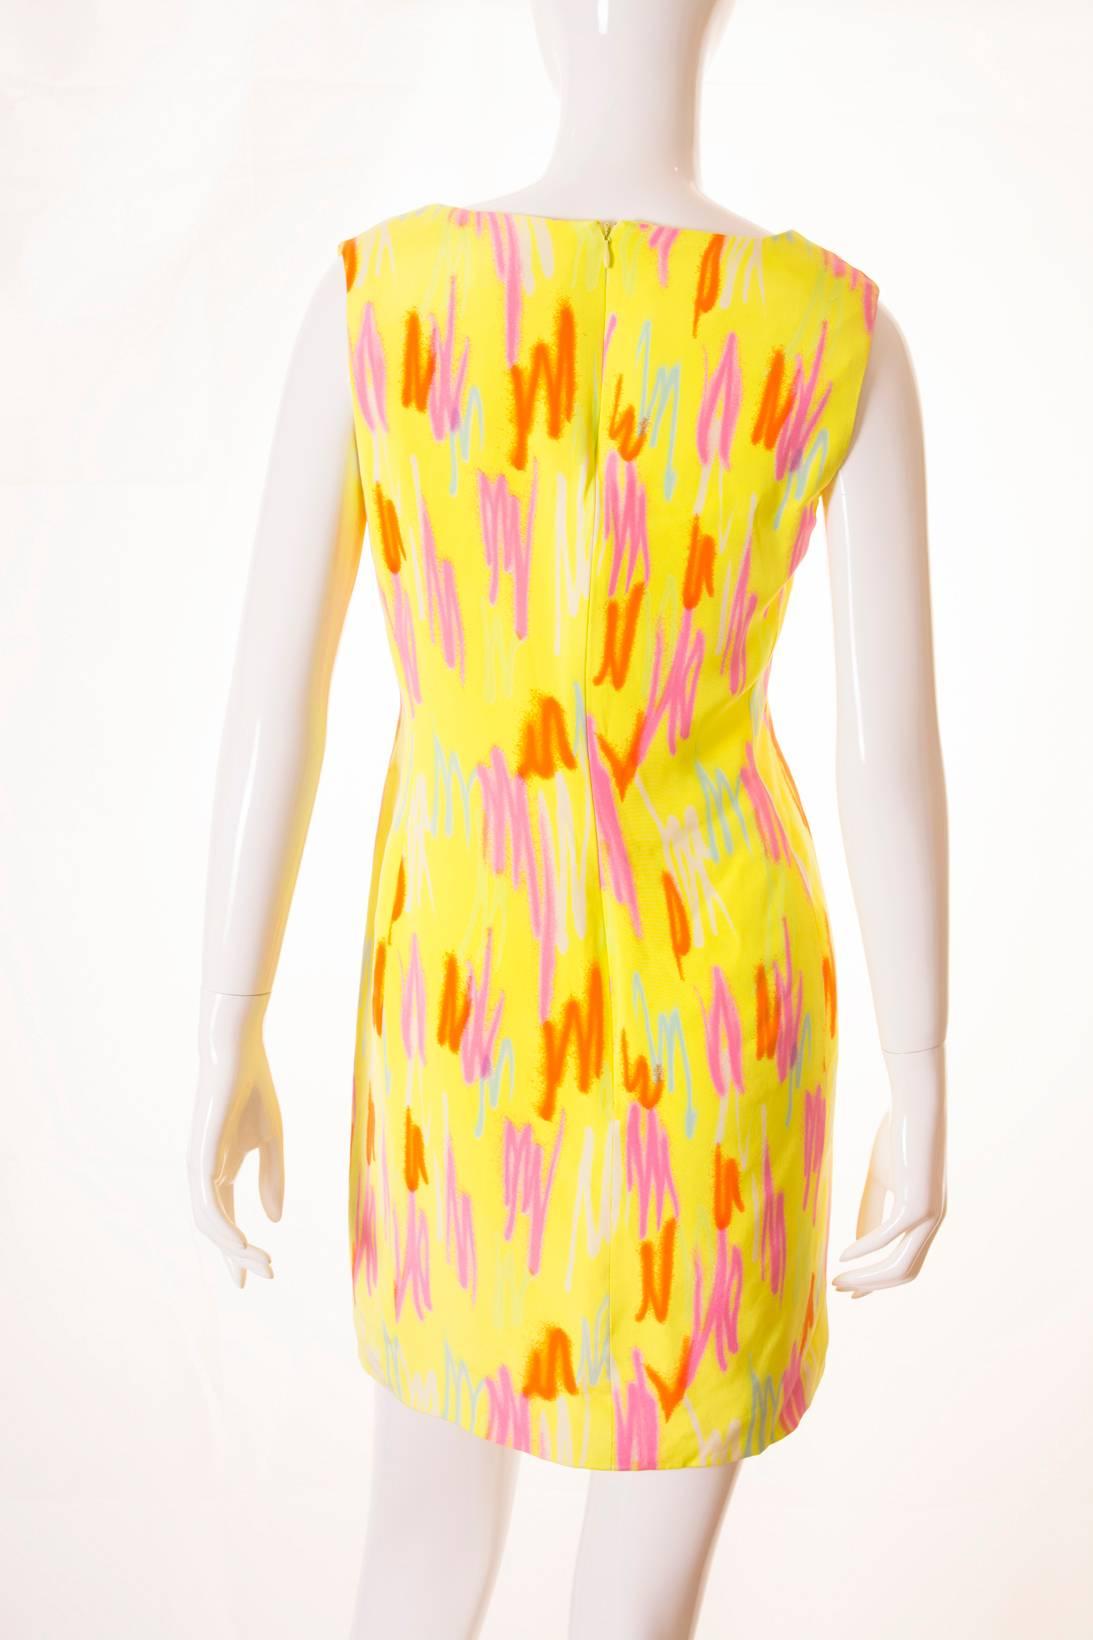 Gianni Versace S/S 1996 Fluoro Shift Dress In Excellent Condition For Sale In Brunswick West, Victoria